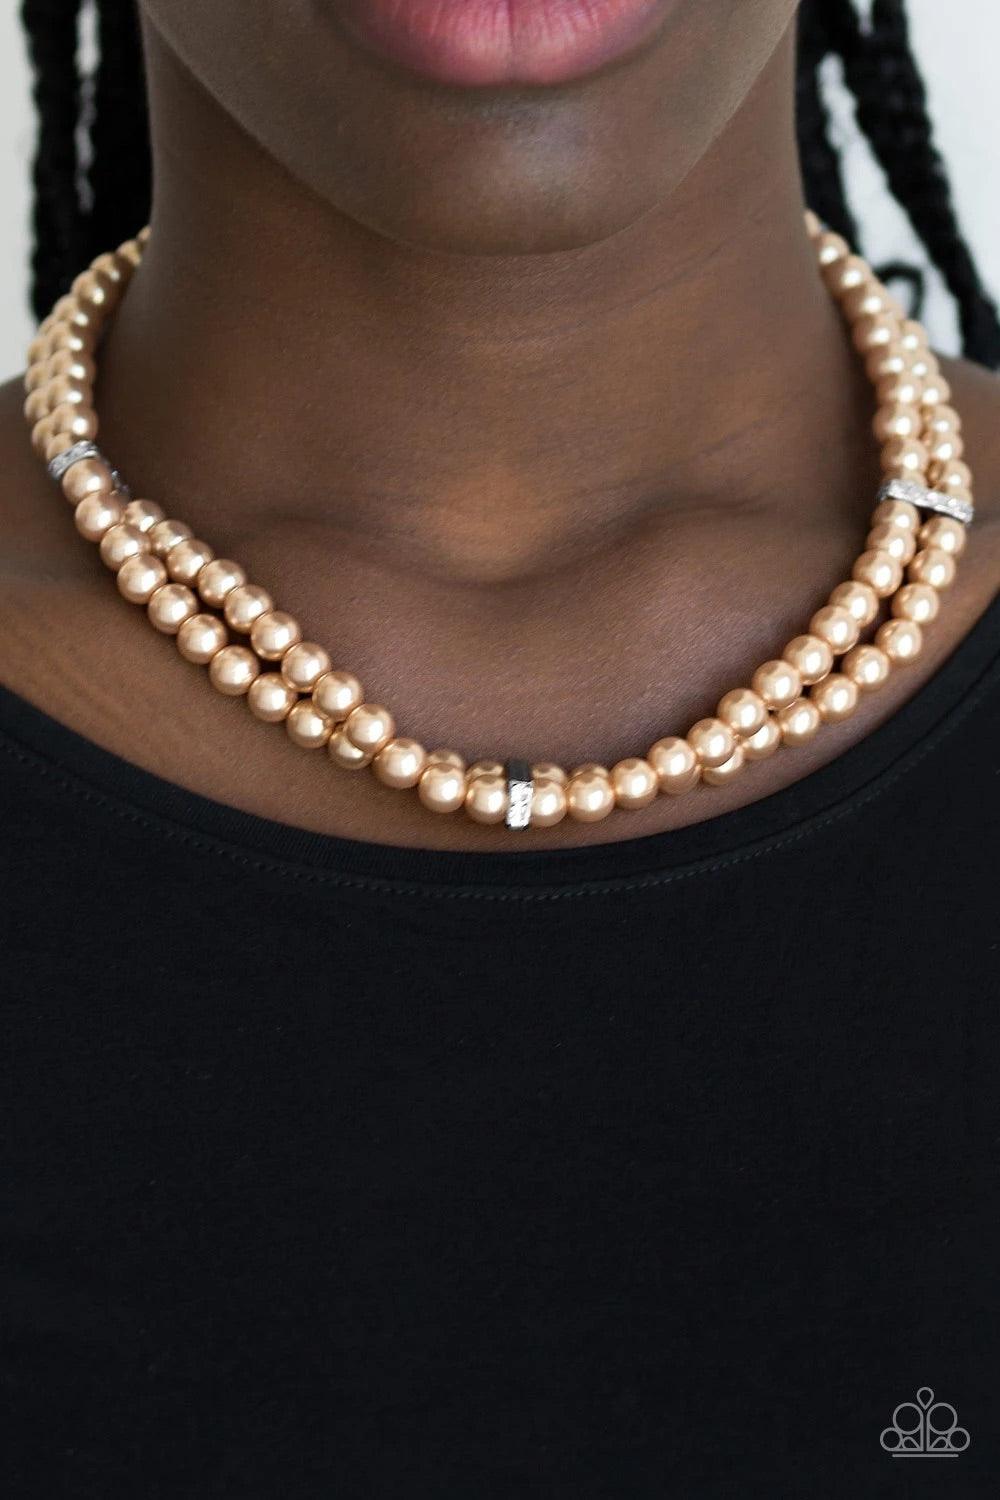 Paparazzi Accessories Put on Your Party Dress - Brown Pinched between white rhinestone encrusted frames, strands of classic brown pearls layer below the collar for a timeless look. Features an adjustable clasp closure. Sold as one individual necklace. Inc